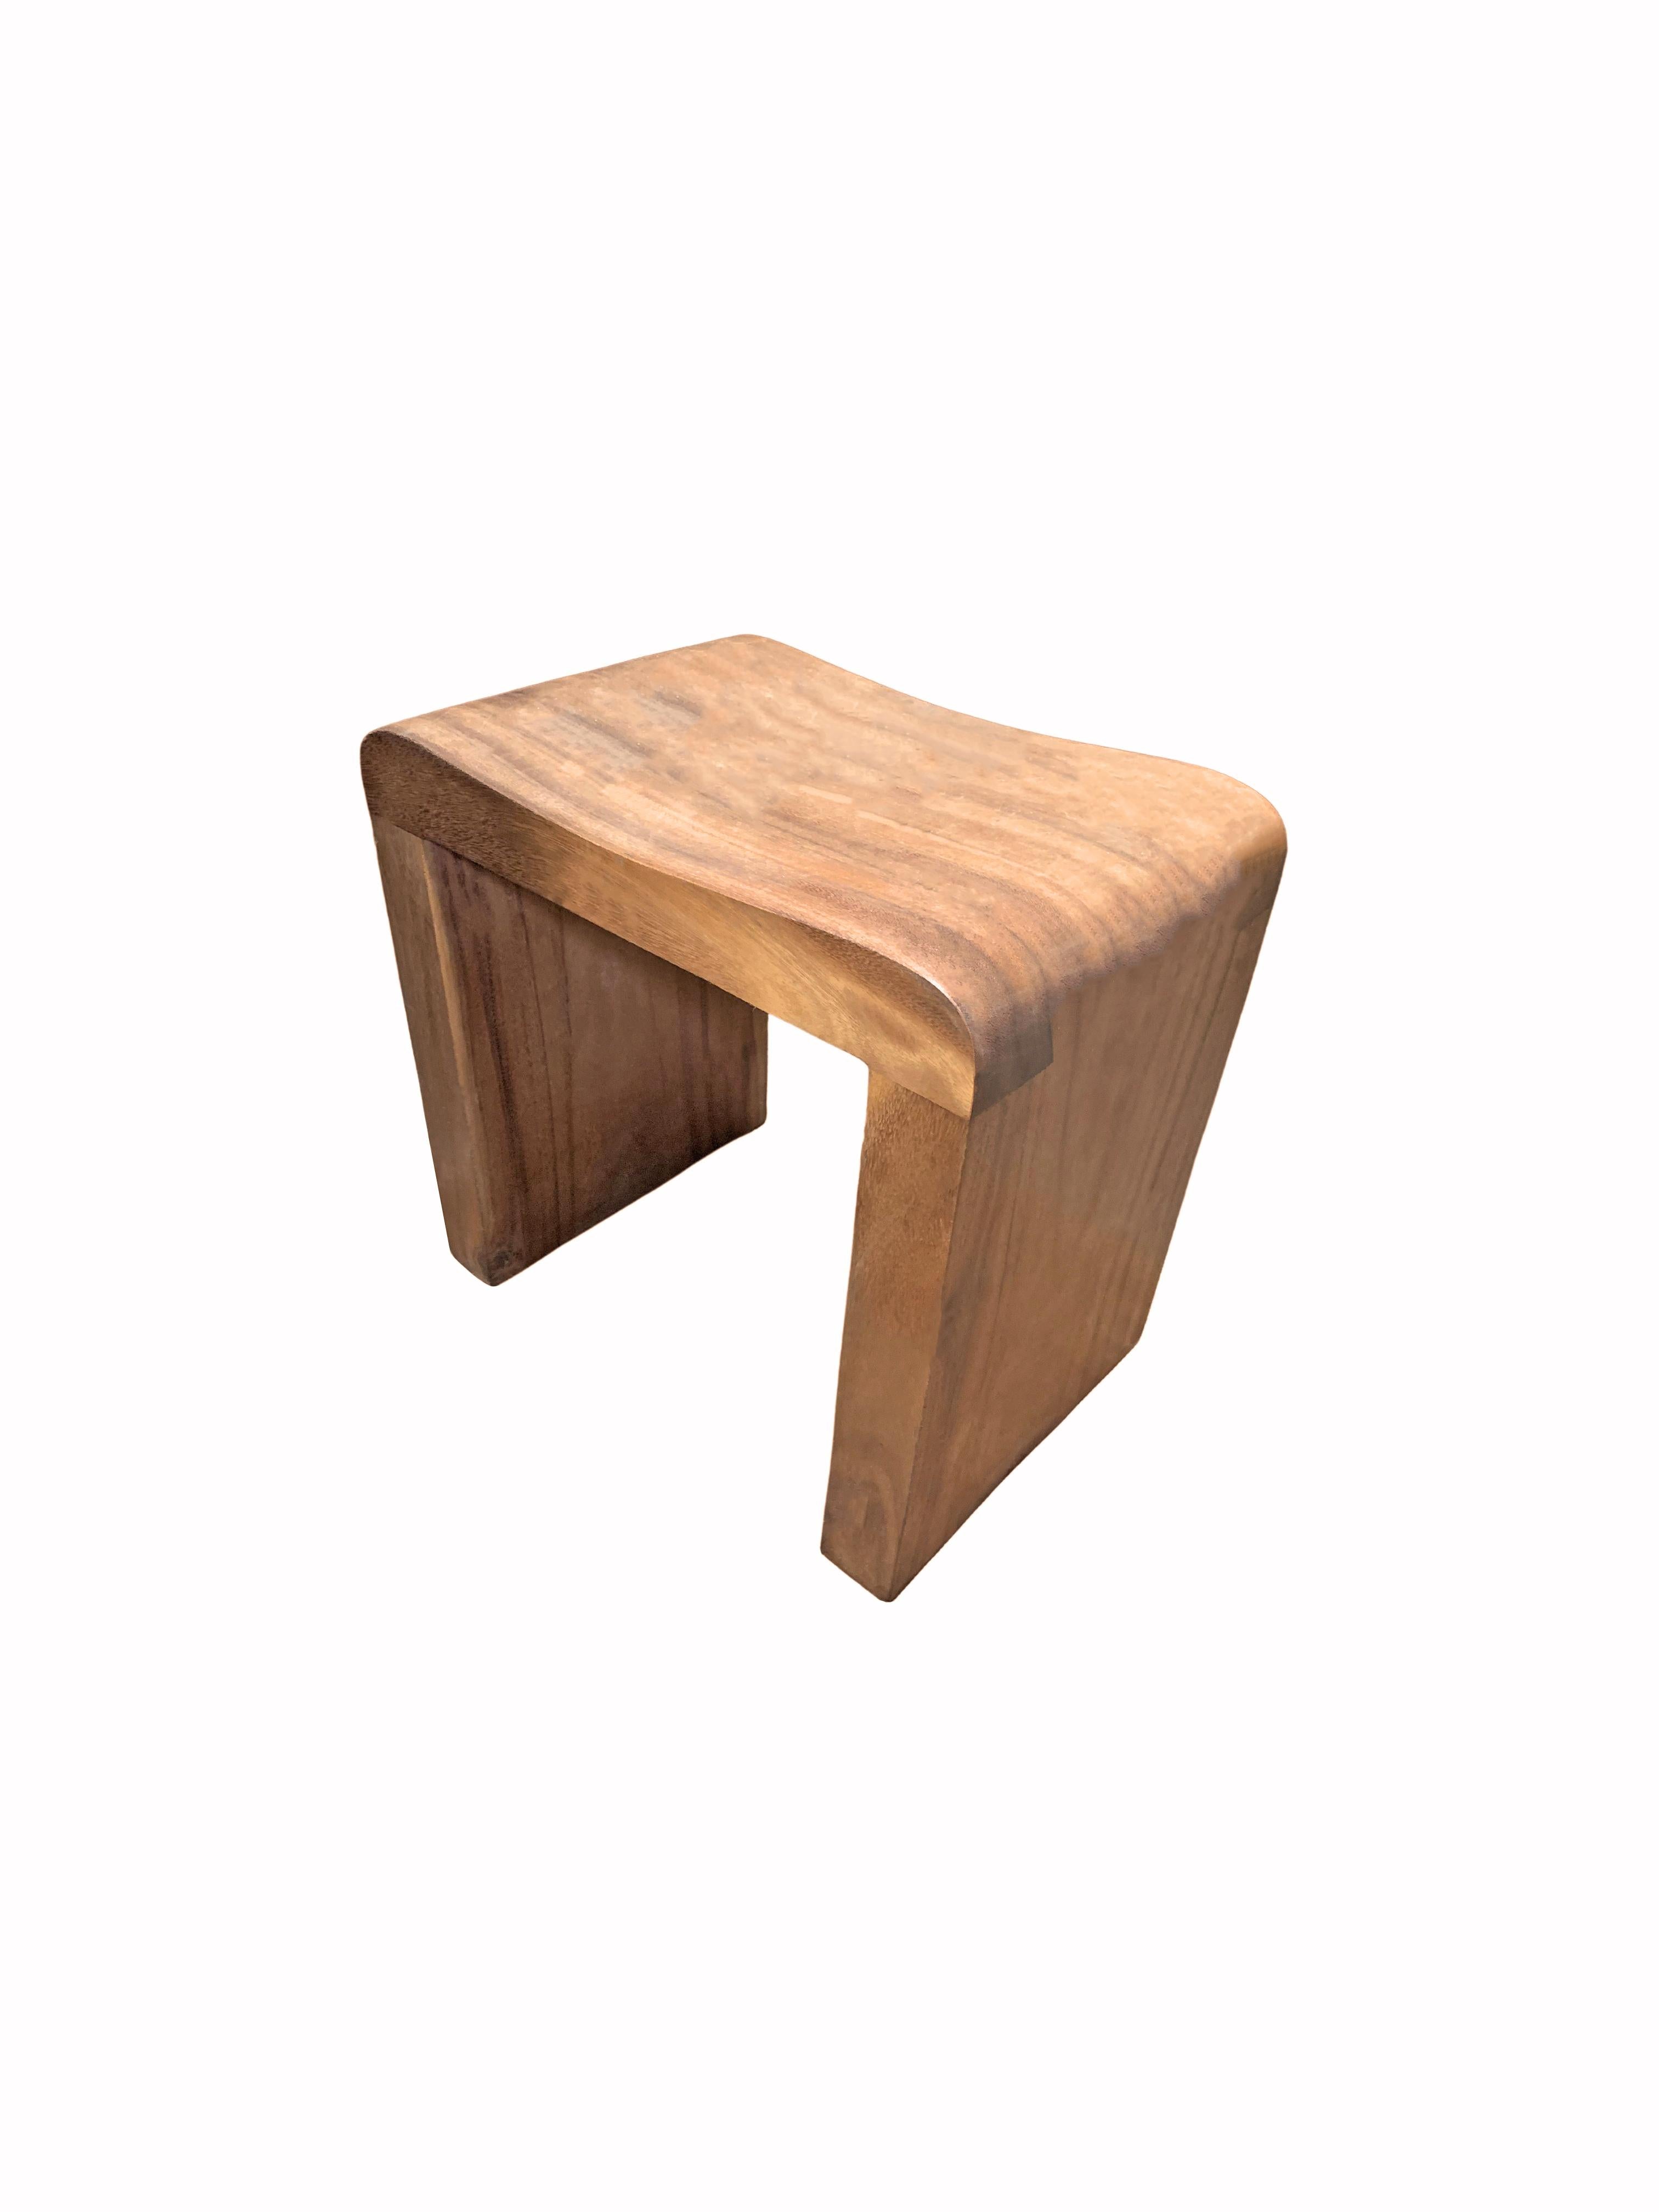 Hand-Crafted Sculptural Teak Wood Stool For Sale